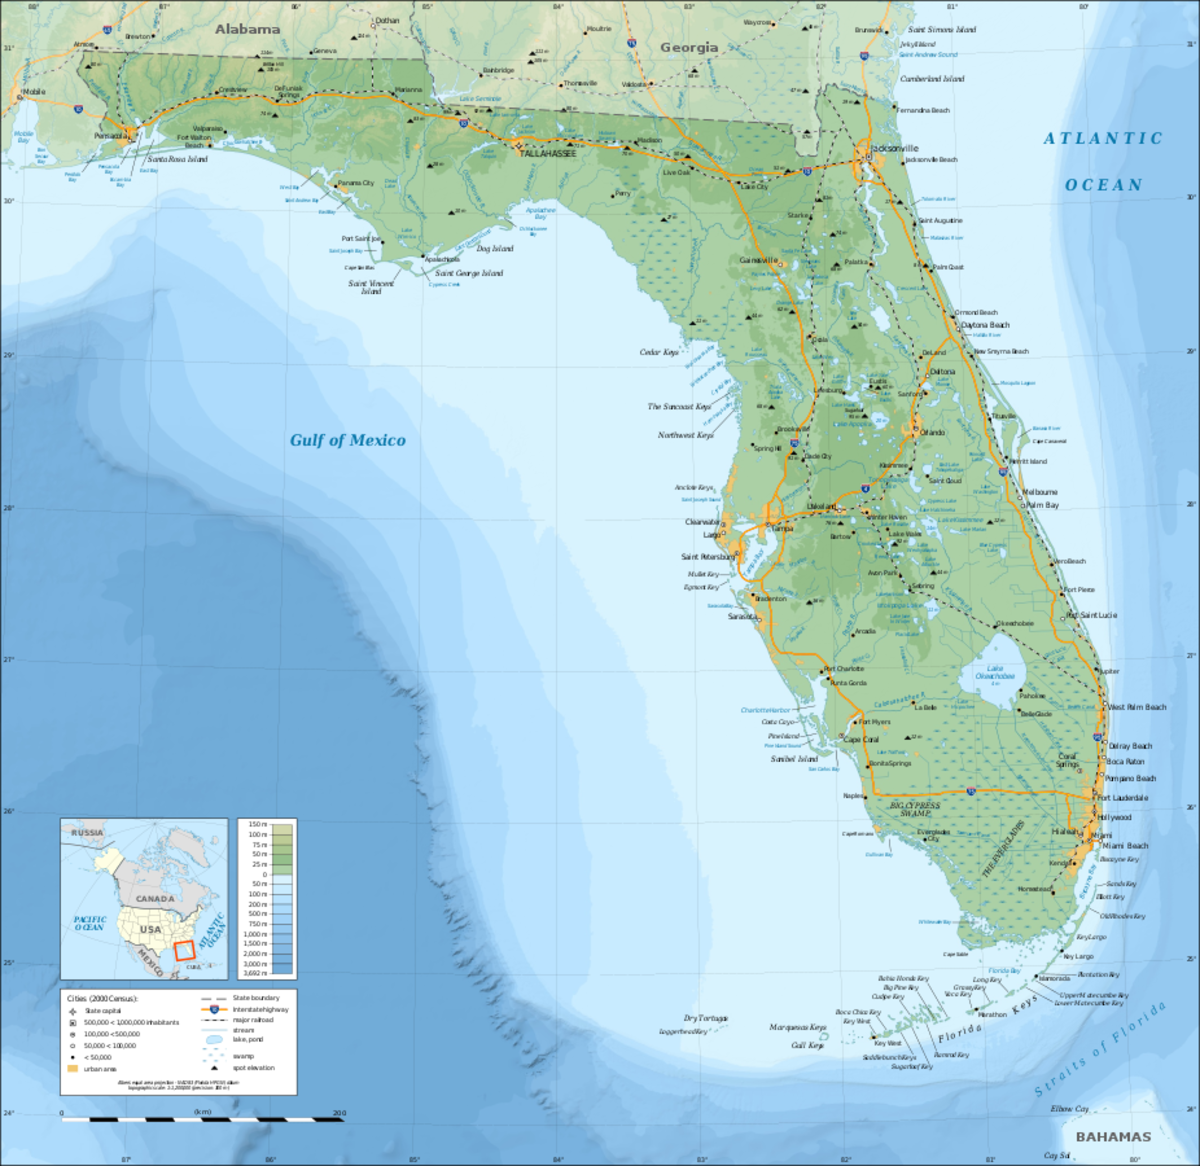 Topographic map of the State of Florida, USA (2000 Census).